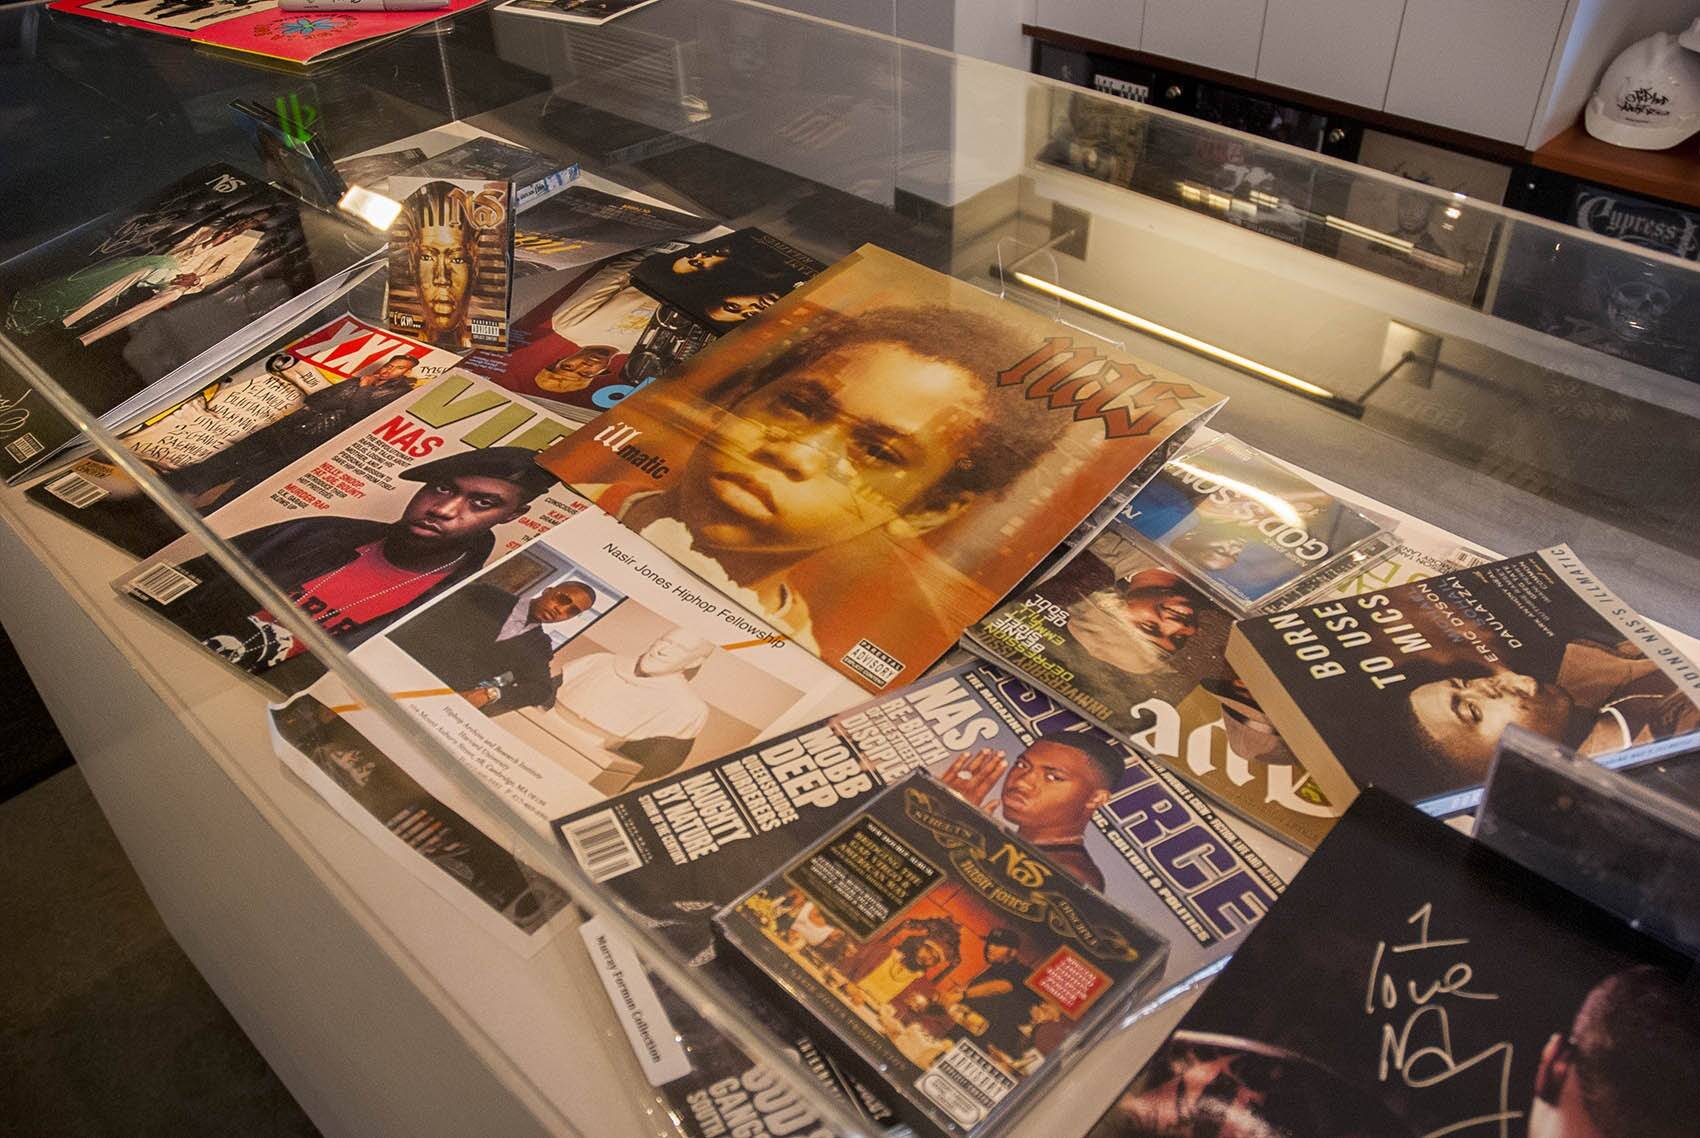 A display case of rap artist Nasir Jones, featuring an issue of The Source magazine, bottom right. (Tonya Mosley/WBUR)